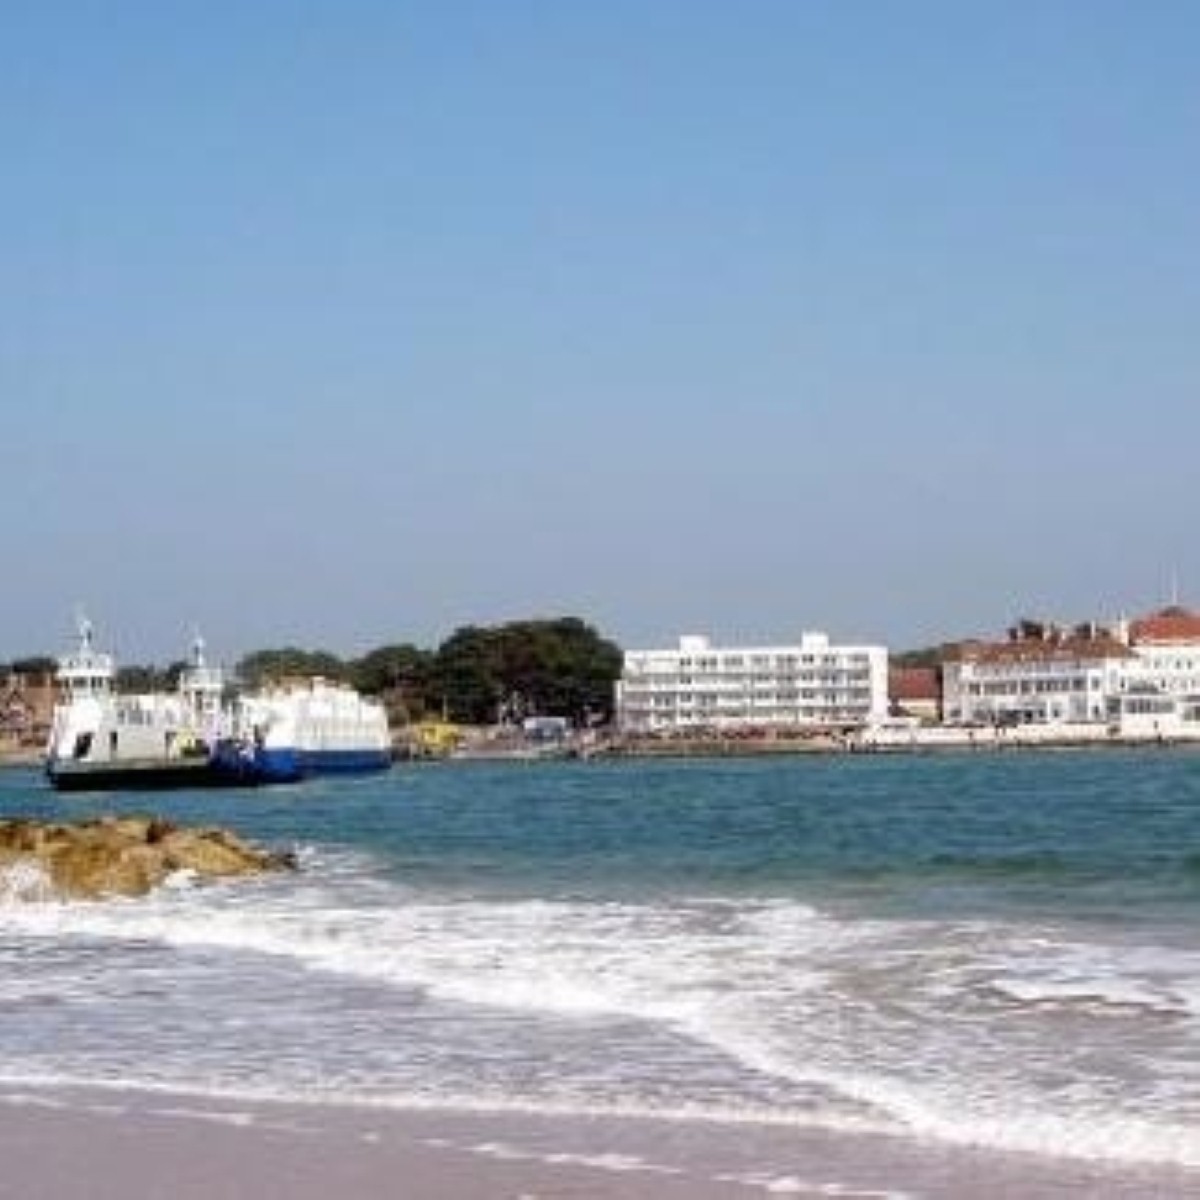 Bournemouth has been voted staycation capital of the UK for 2009